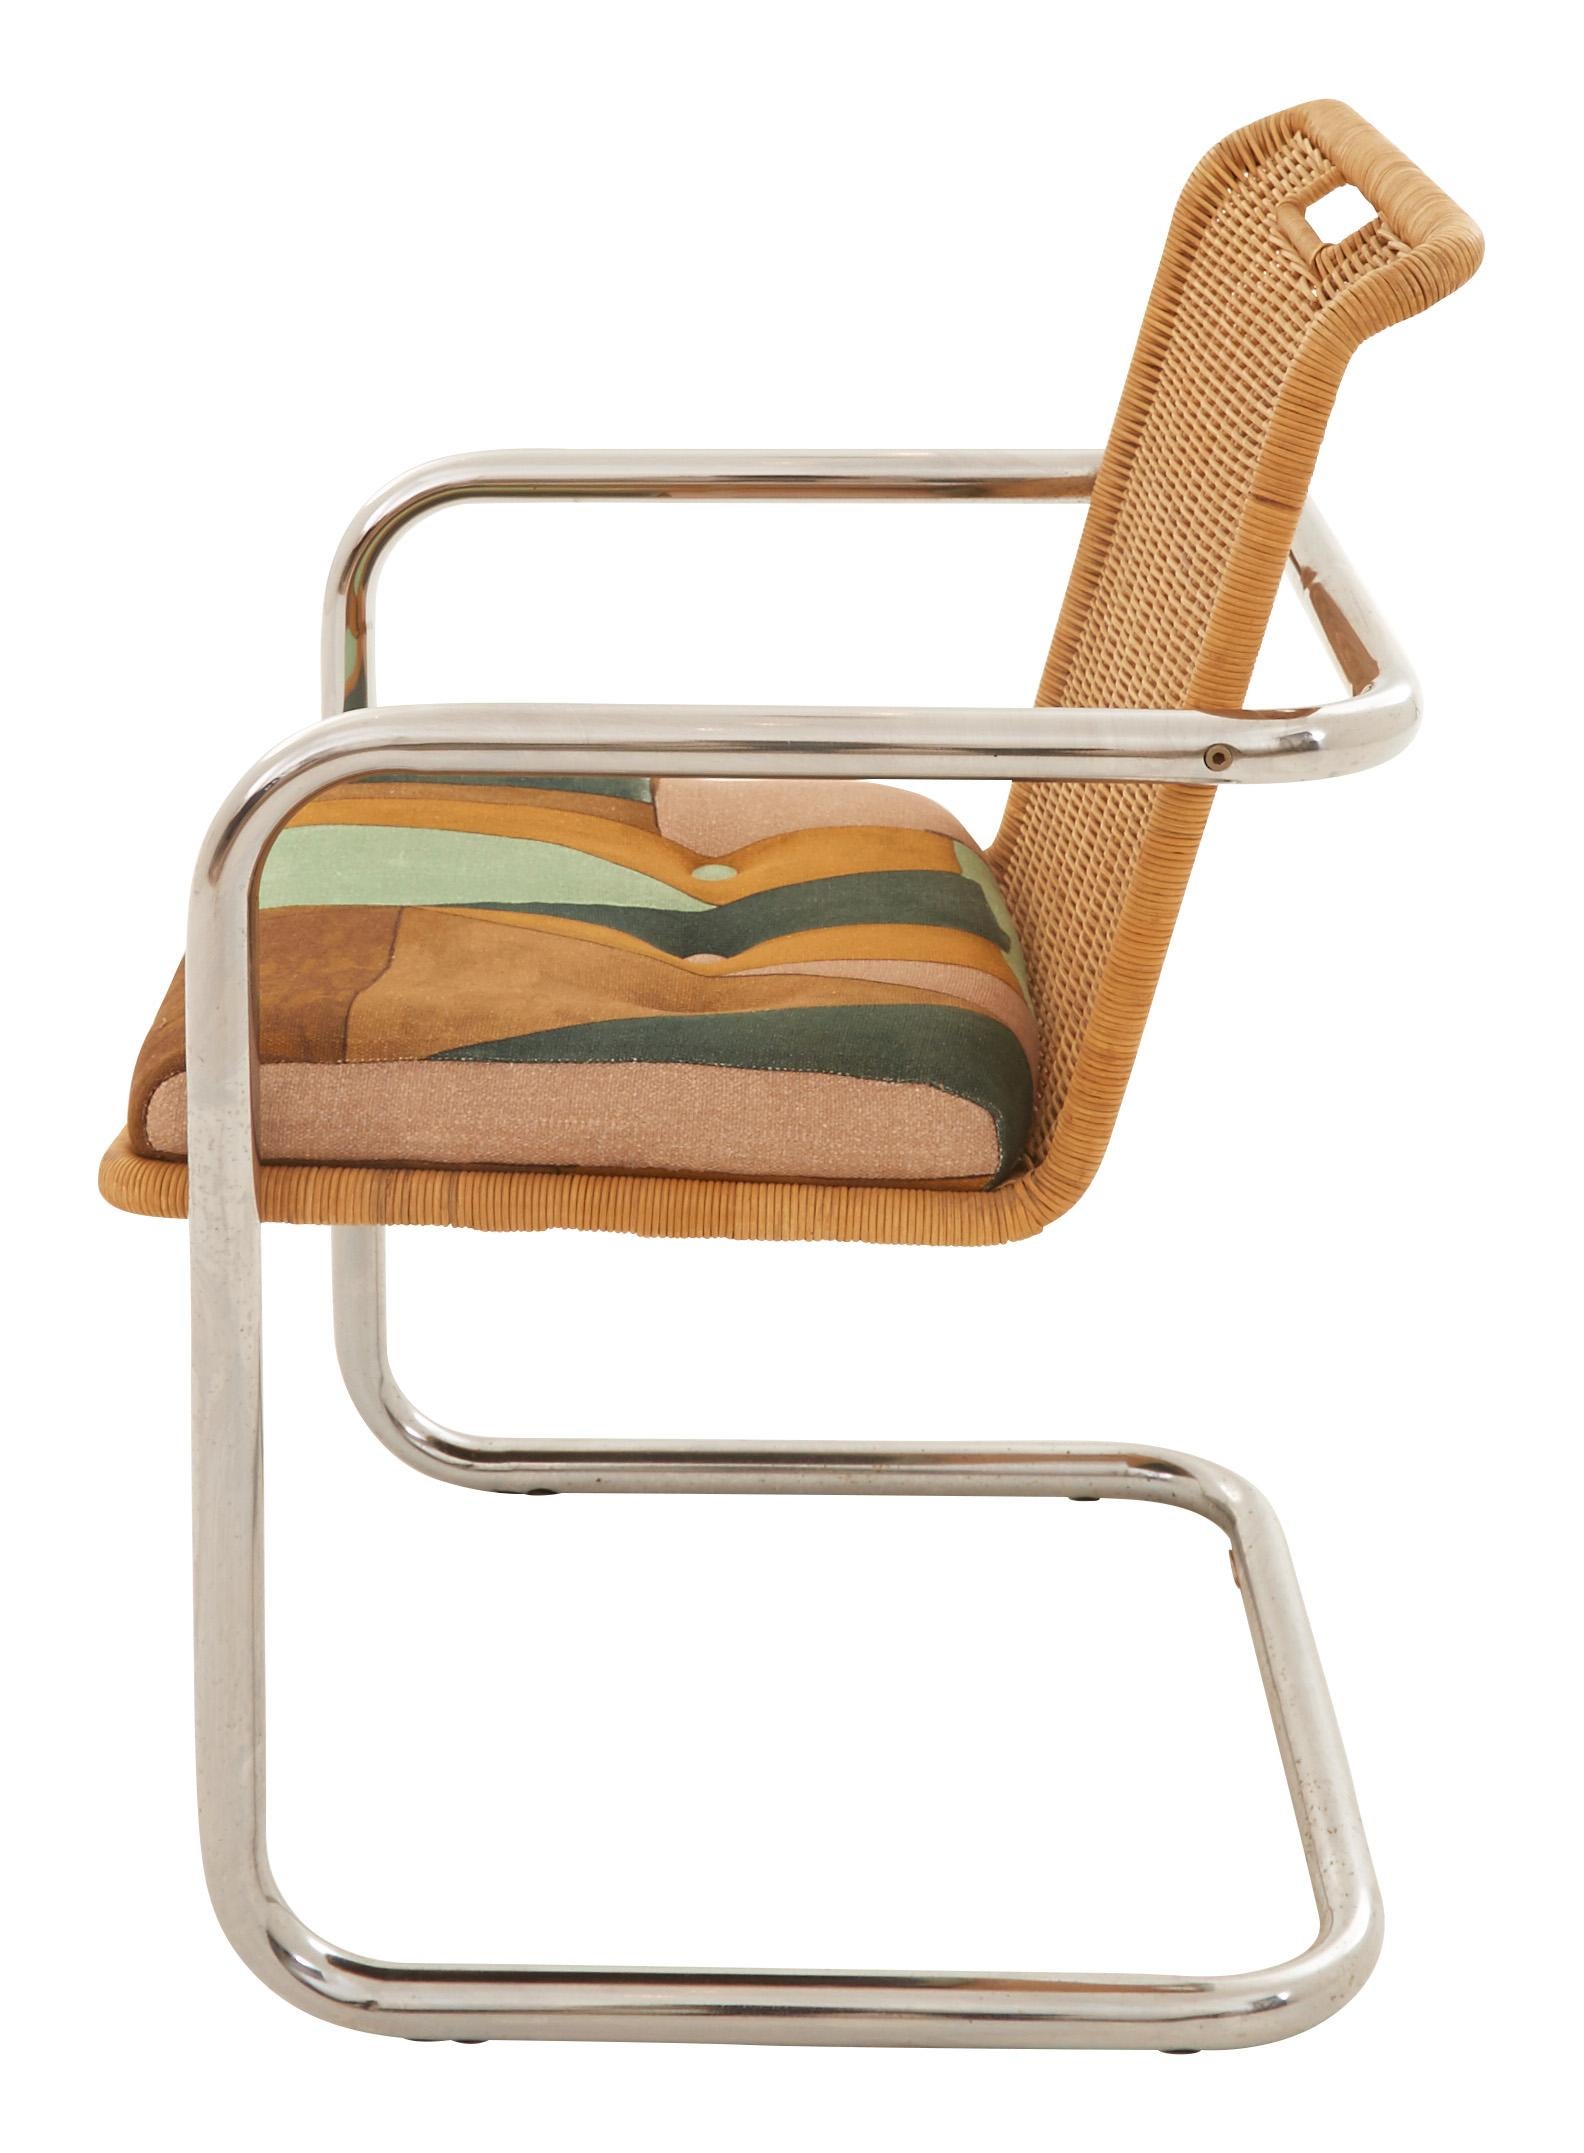 • Chrome frame and rattan back seat
• Reupholstered in Kelly Wearstler district tobacco 100% linen fabric
• Mid-20th century
• American

Dimensions:
• Overall: 21.5